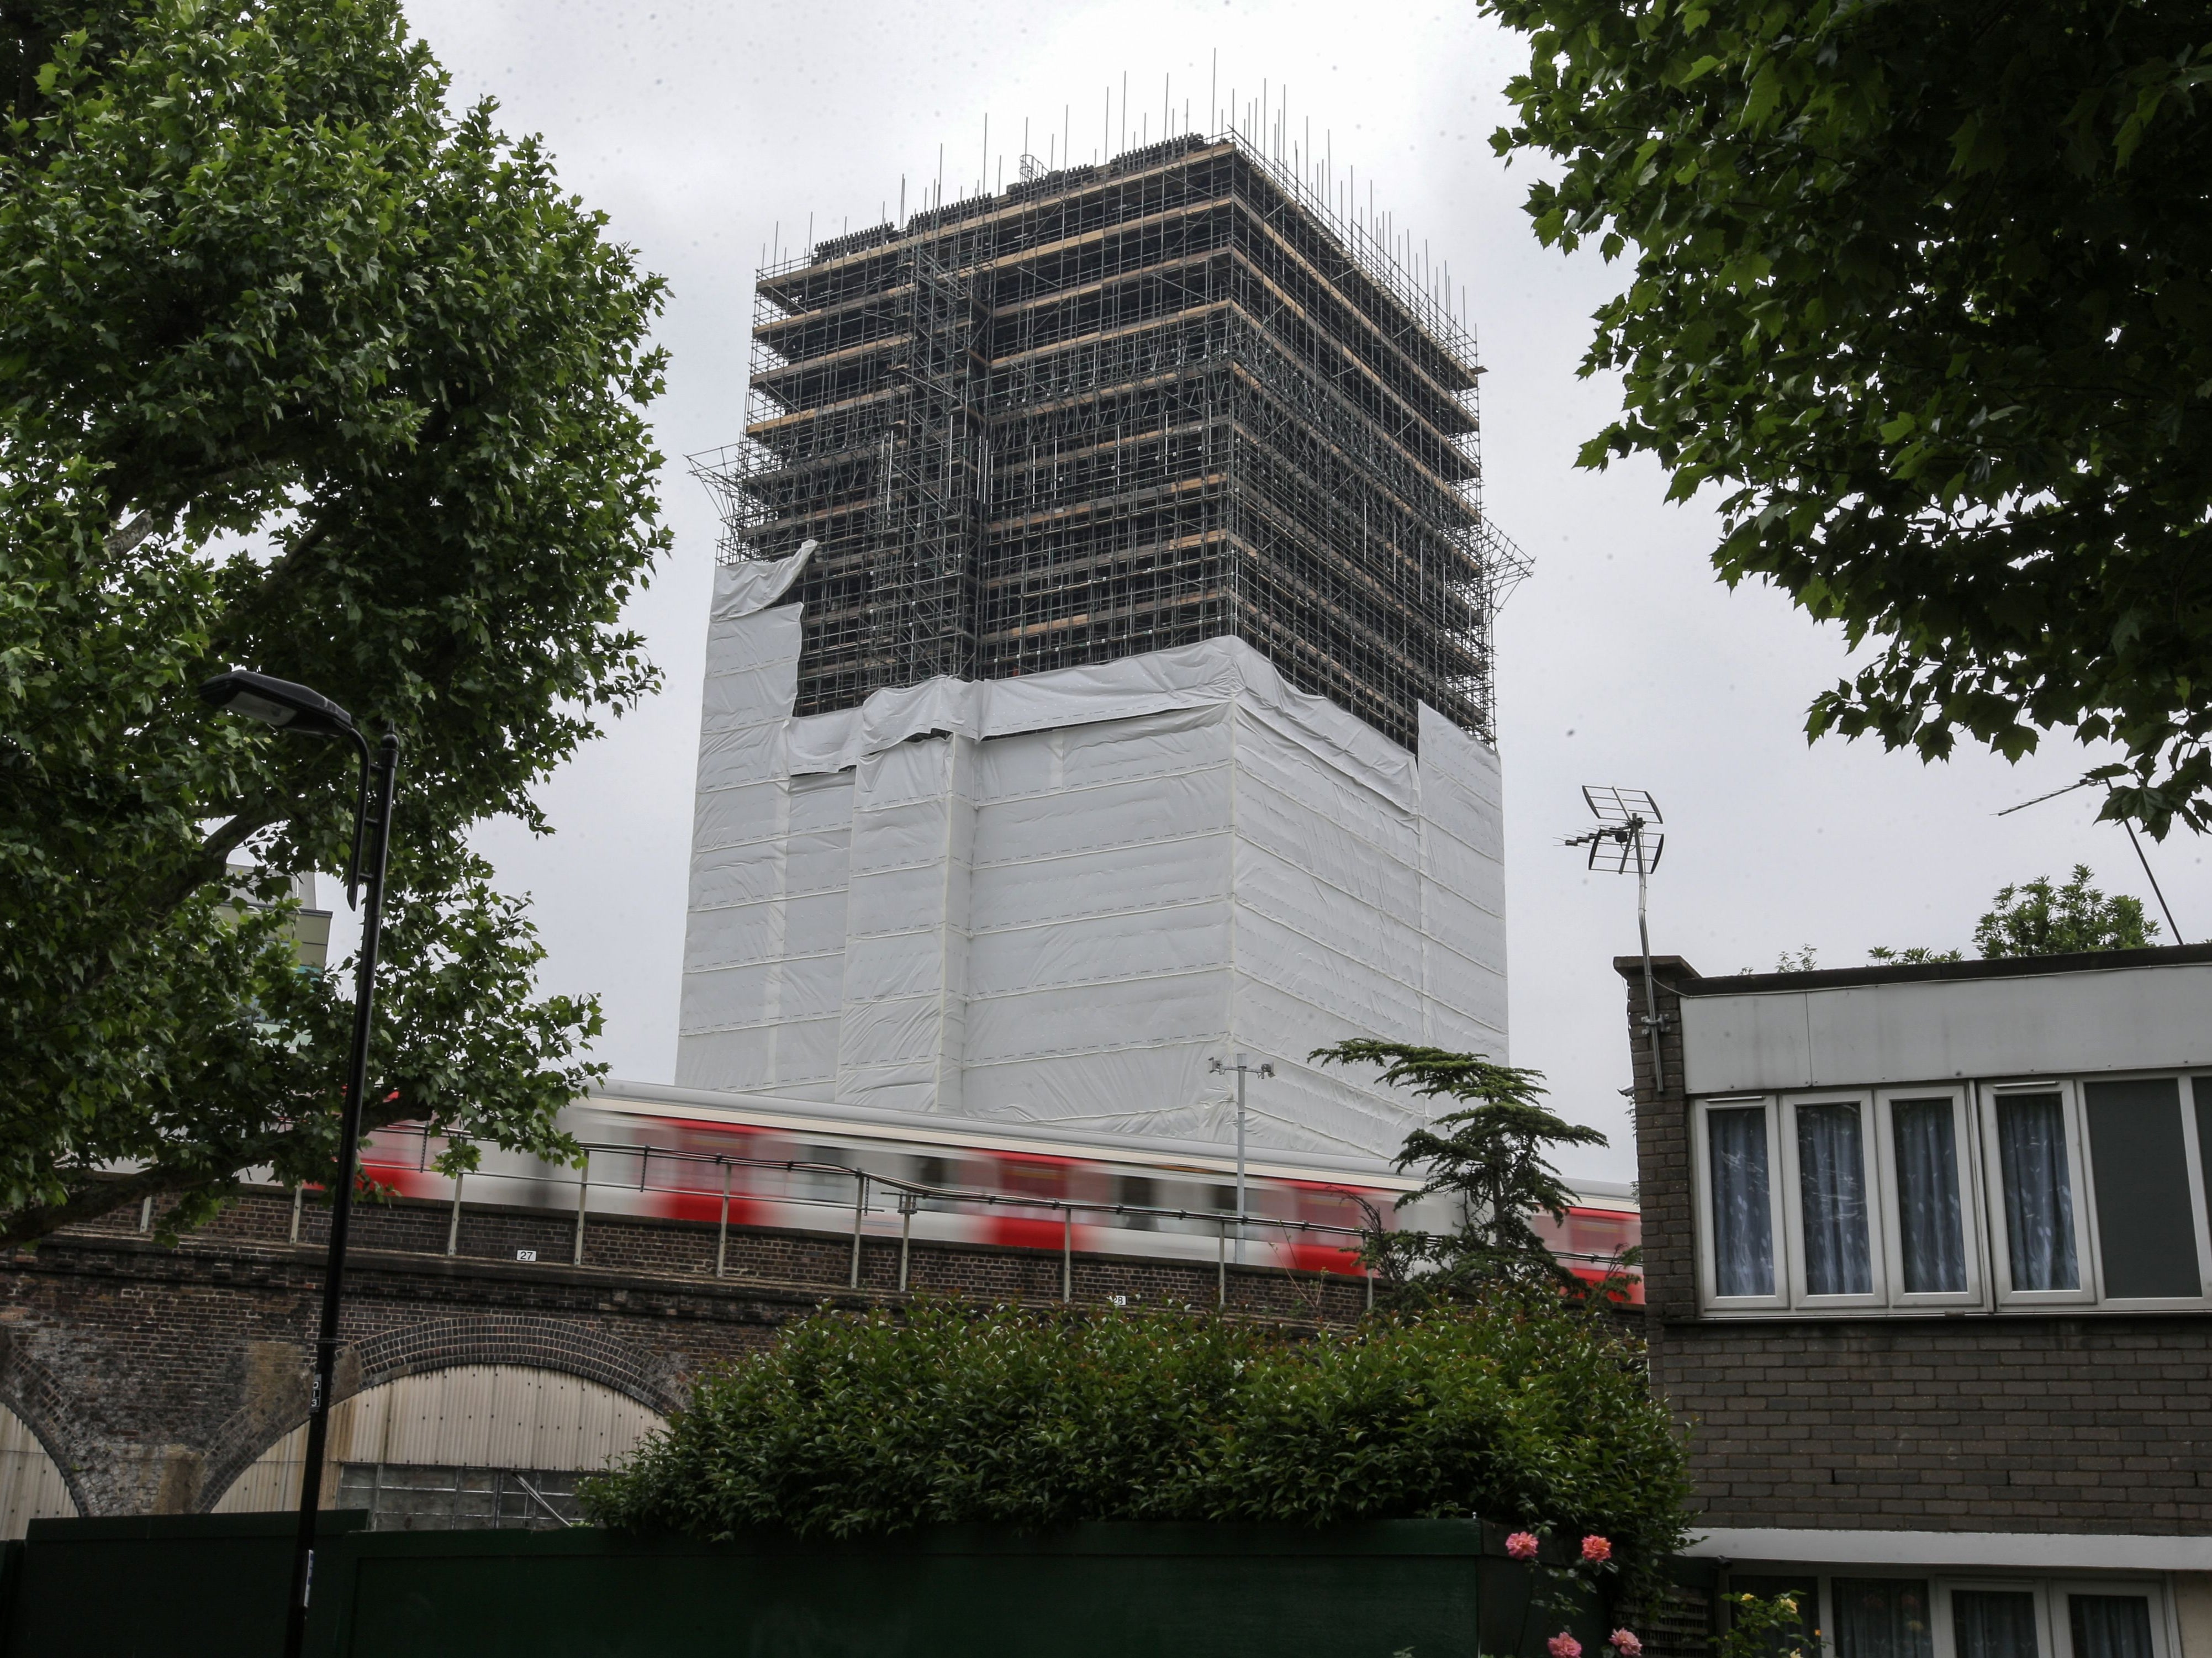 A tube train passes the burned-out shell of Grenfell Tower block in west London on May 25, 2018.